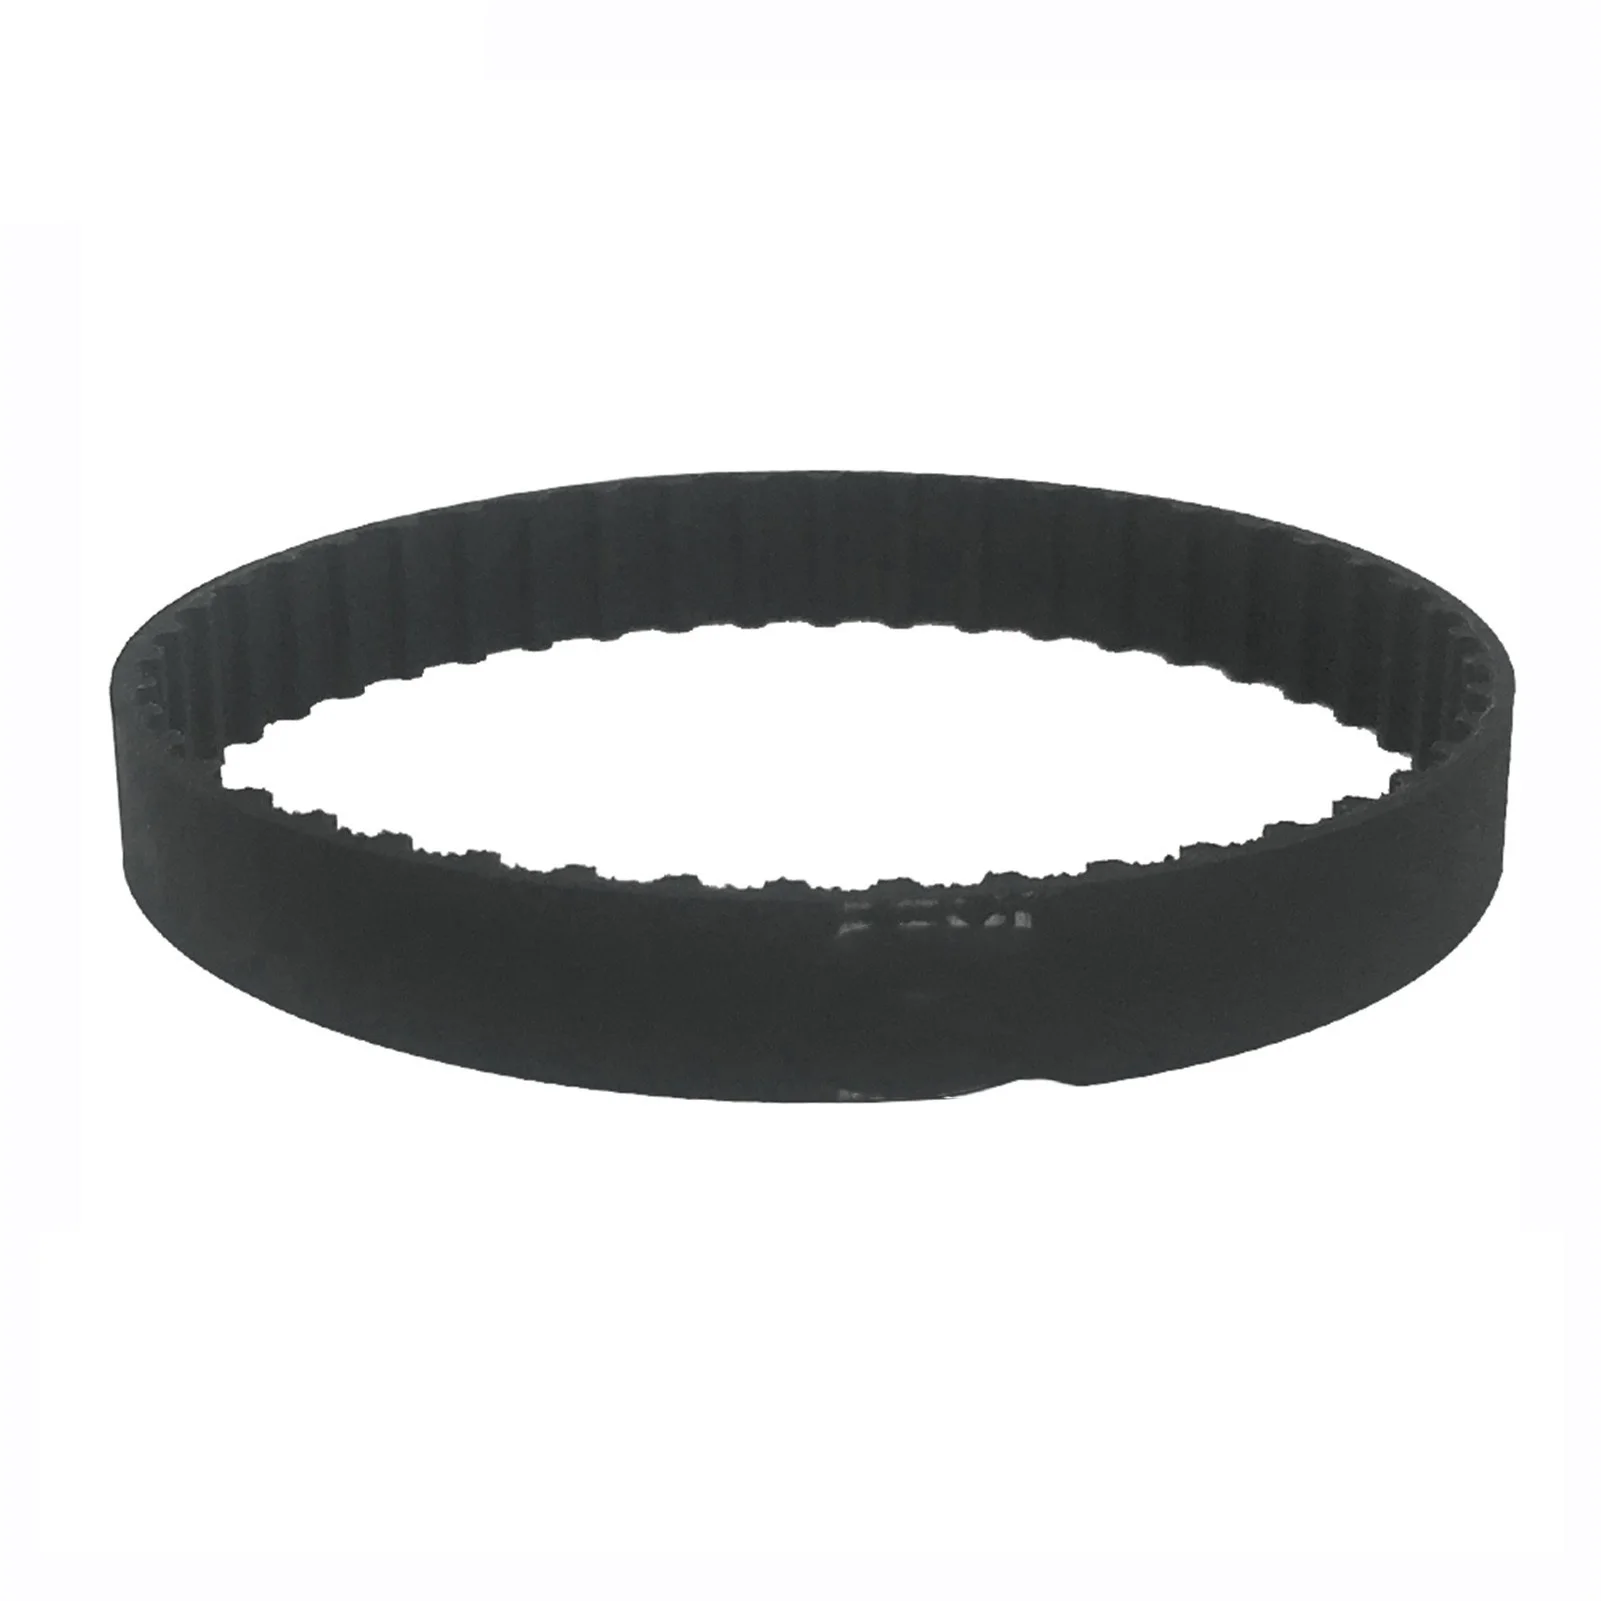 

GT2 Timing Belt, Rubber Closed Loop Gear Pulley Belt, 2GT-134/136/140/146/150/154/158/160/172/180/186, 6/10mm Width, Toothed